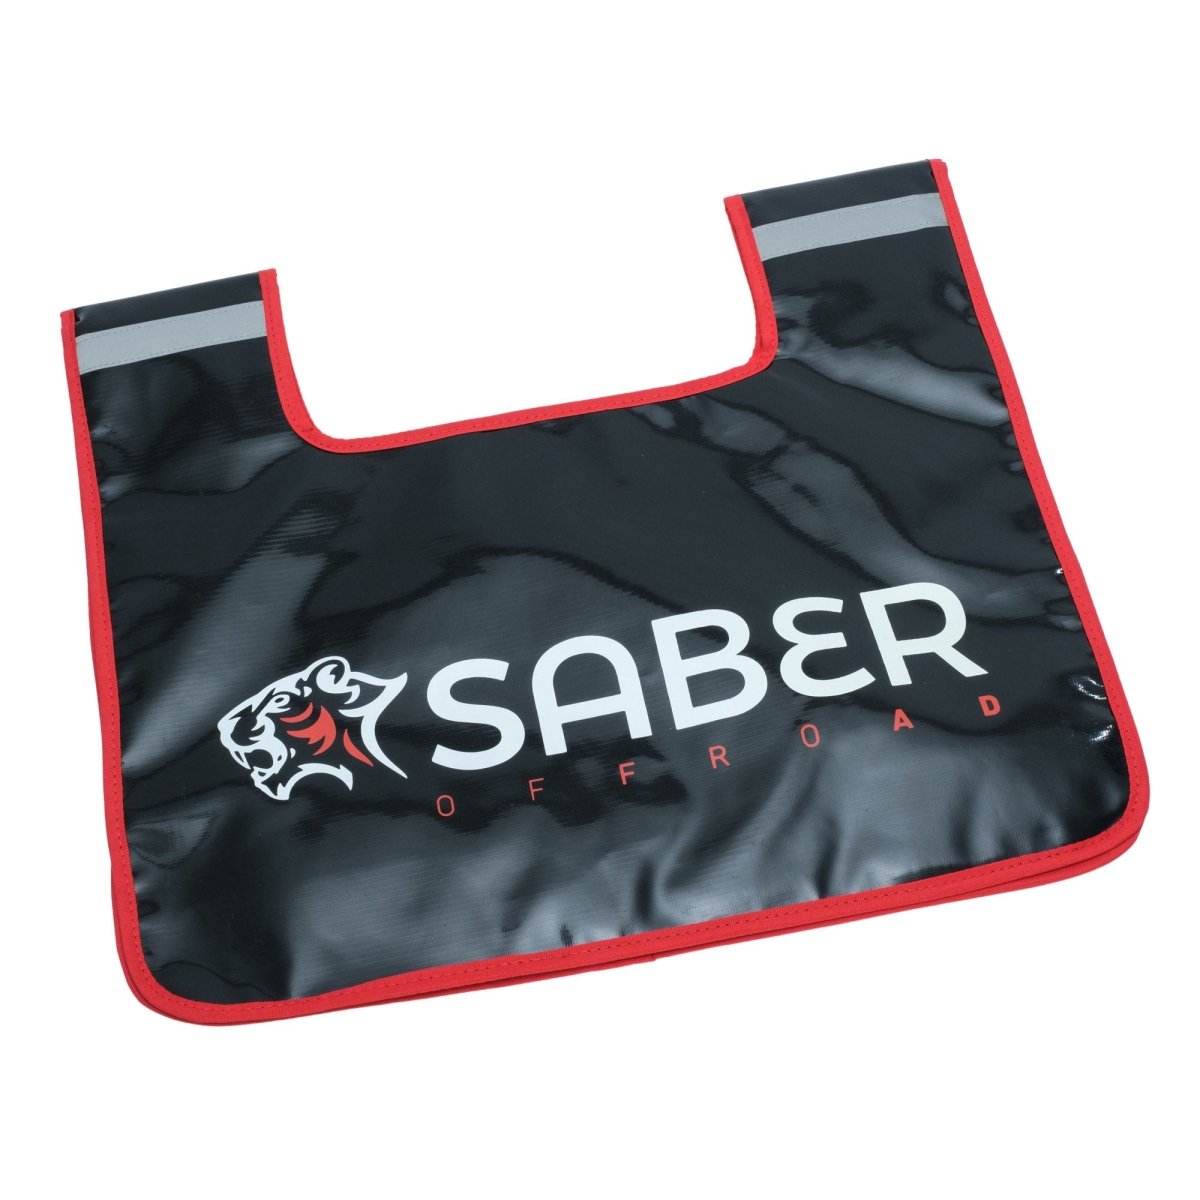 Saber Ultimate Recovery Kit - 12K | Saber Offroad | A247 Gear